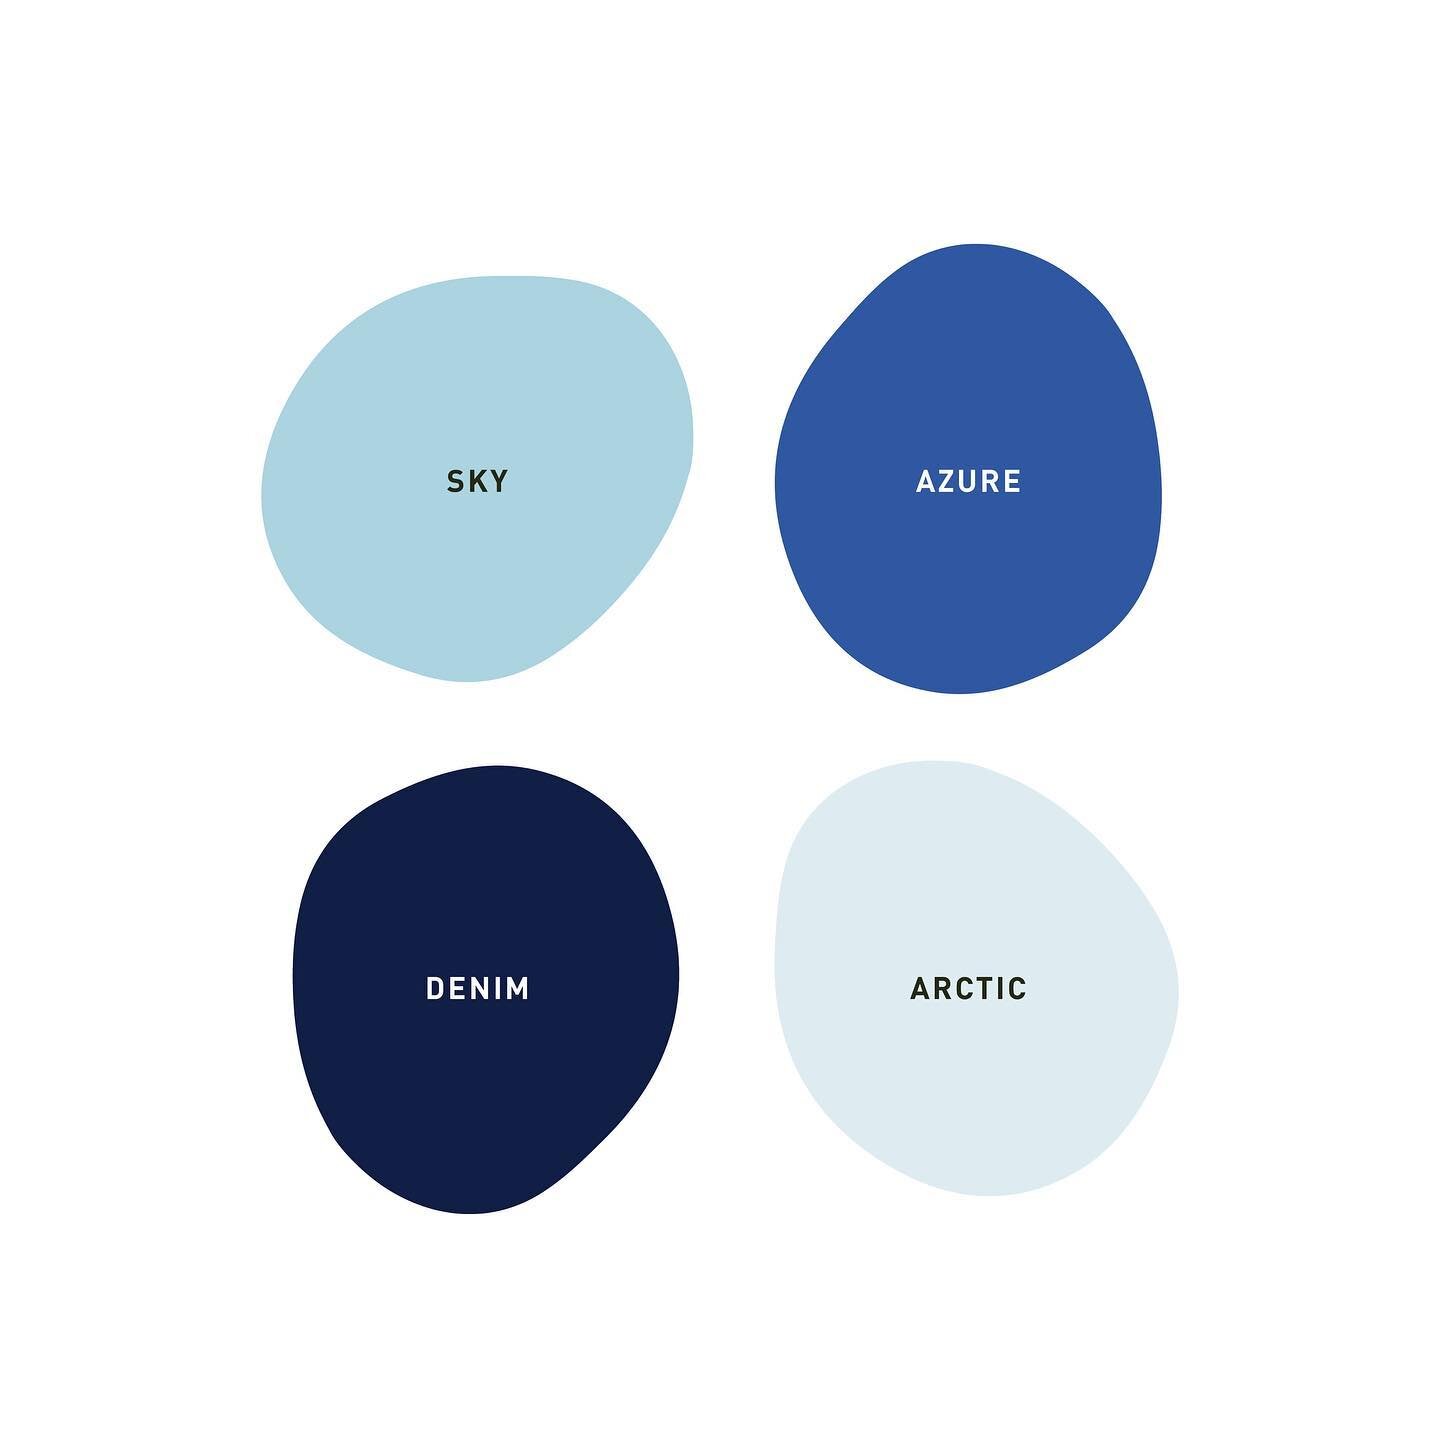 The good kind of Monday Blues. 

Brand color helps cultivate a strong connection with your customer by establishing what mood or emotion they feel when interacting with your brand. 

Light blue has the ability to create a sense of tranquilly, trust, 